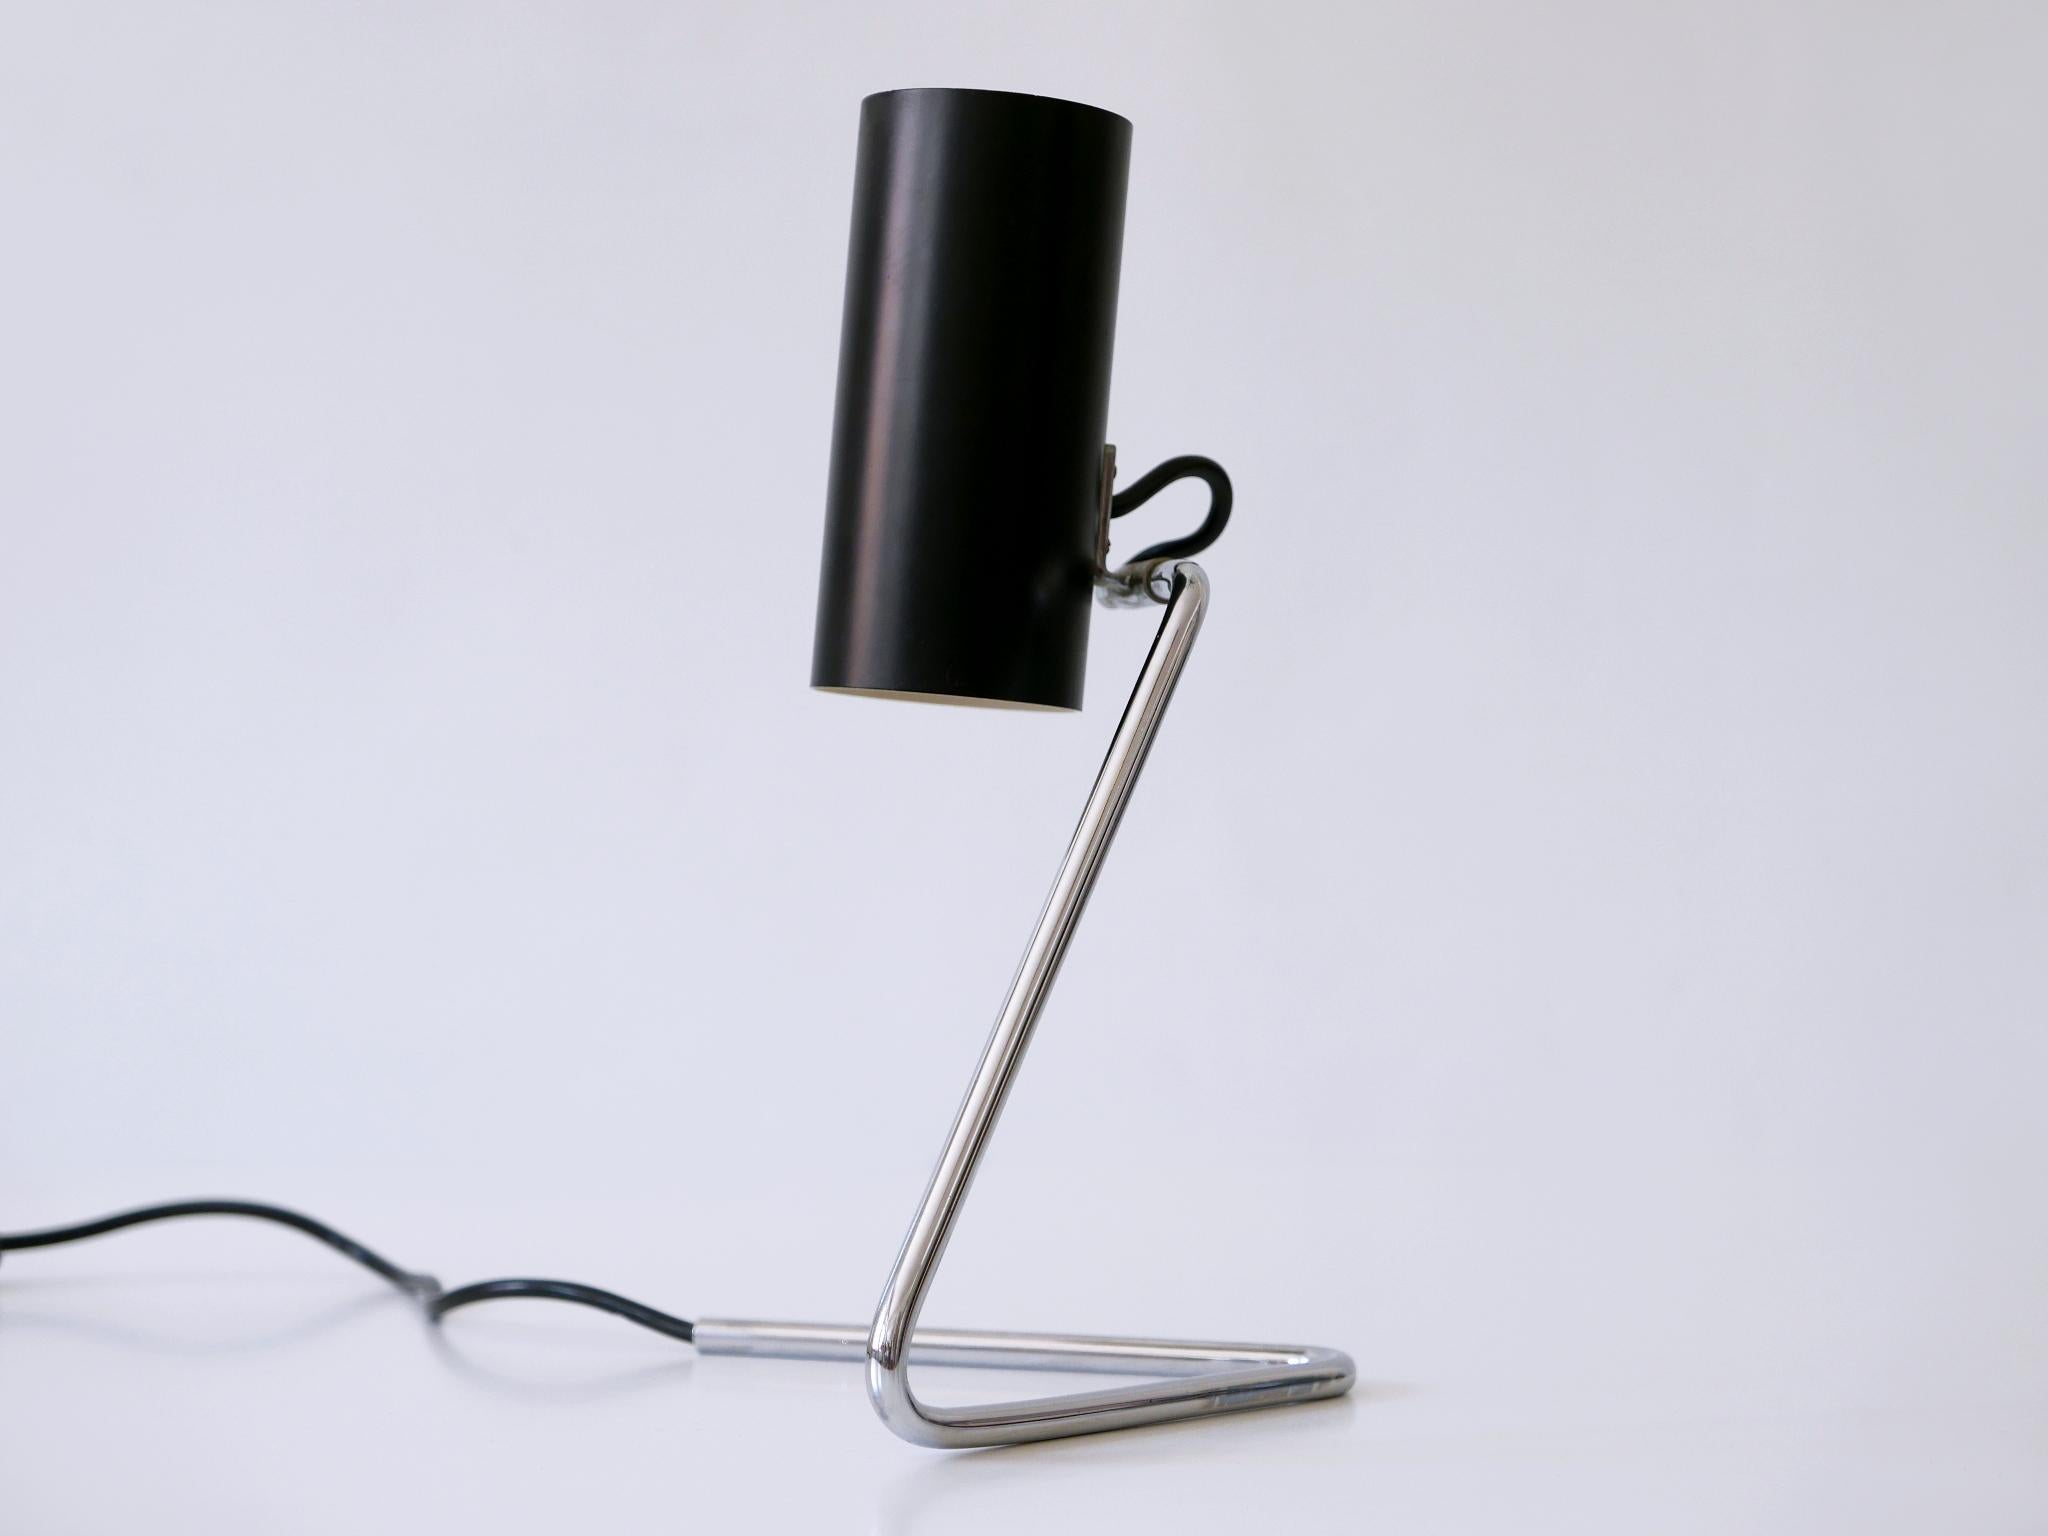 Mid-20th Century Rare Mid-Century Wall or Table Lamp 551/31 B by Gino Sarfatti for Arteluce 1953